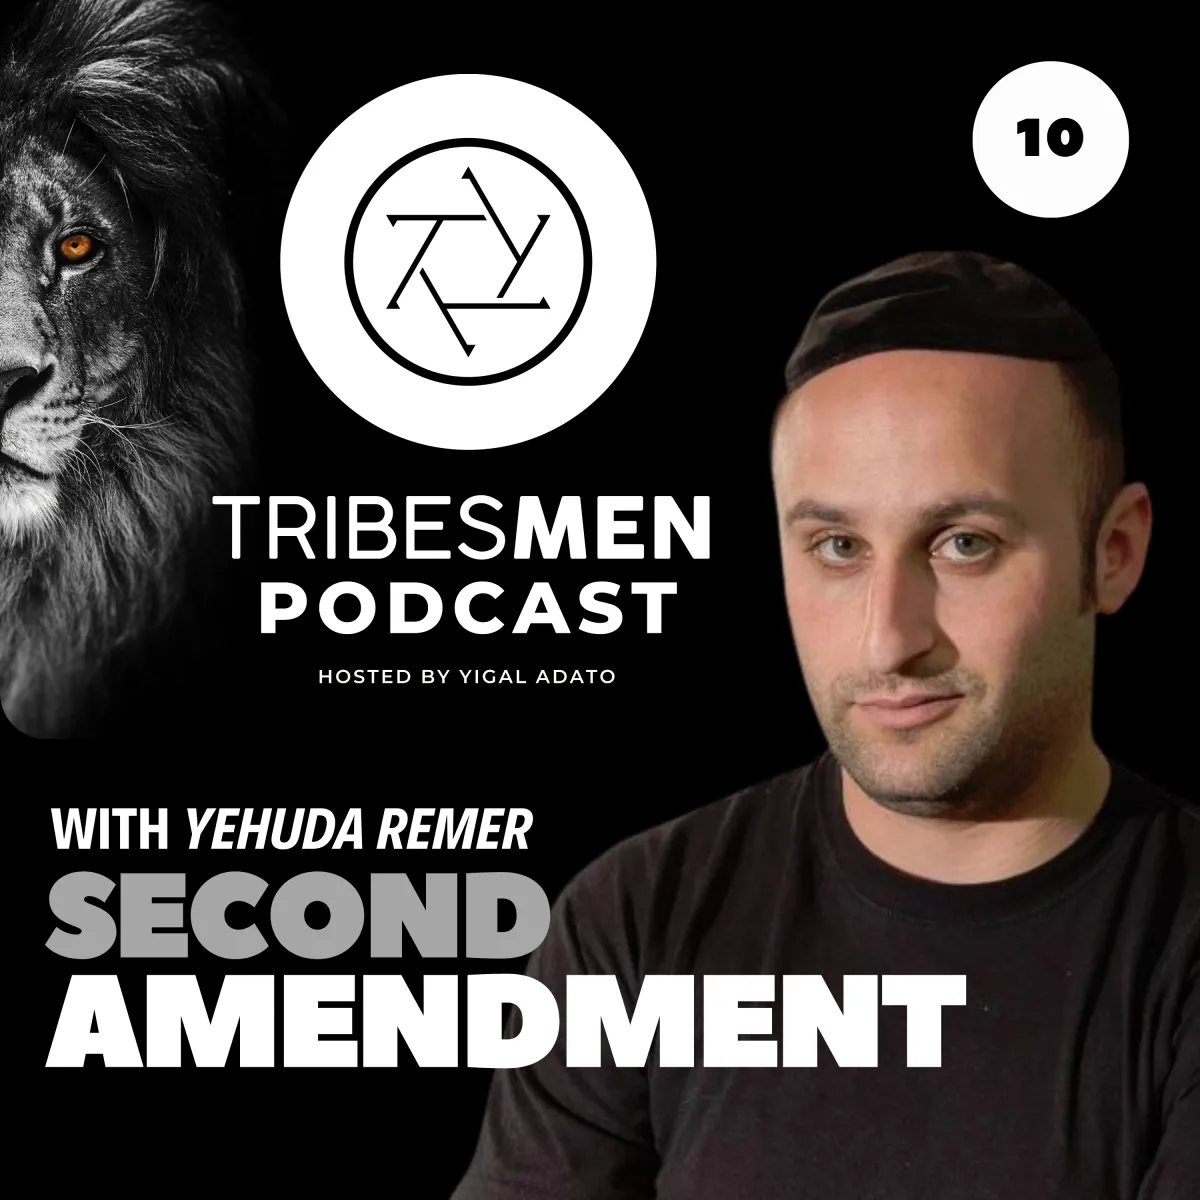 Tribesmen Podcast Episode 10 with Yehuda Remer